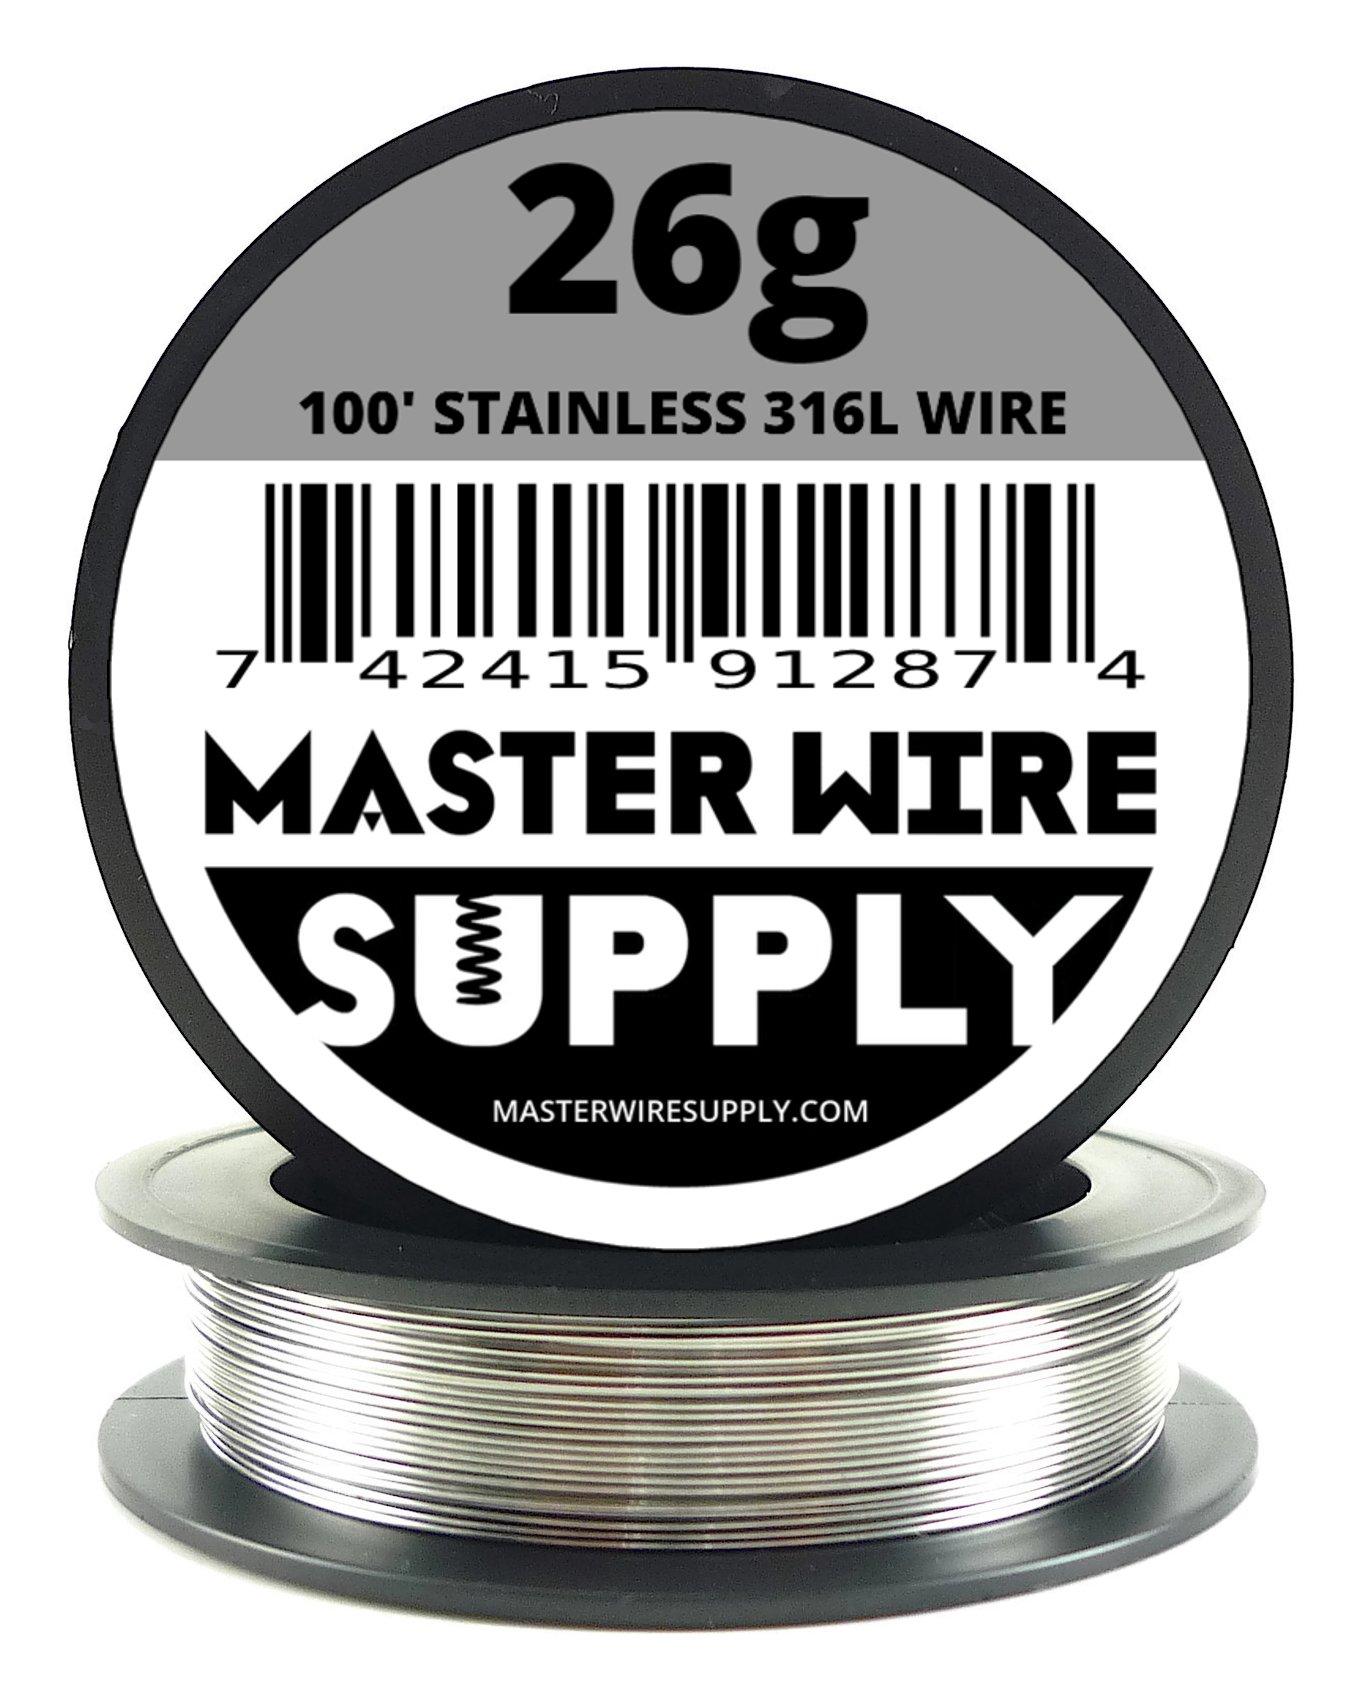 Stainless Steel 316L - 100' - 26 Gauge Wire